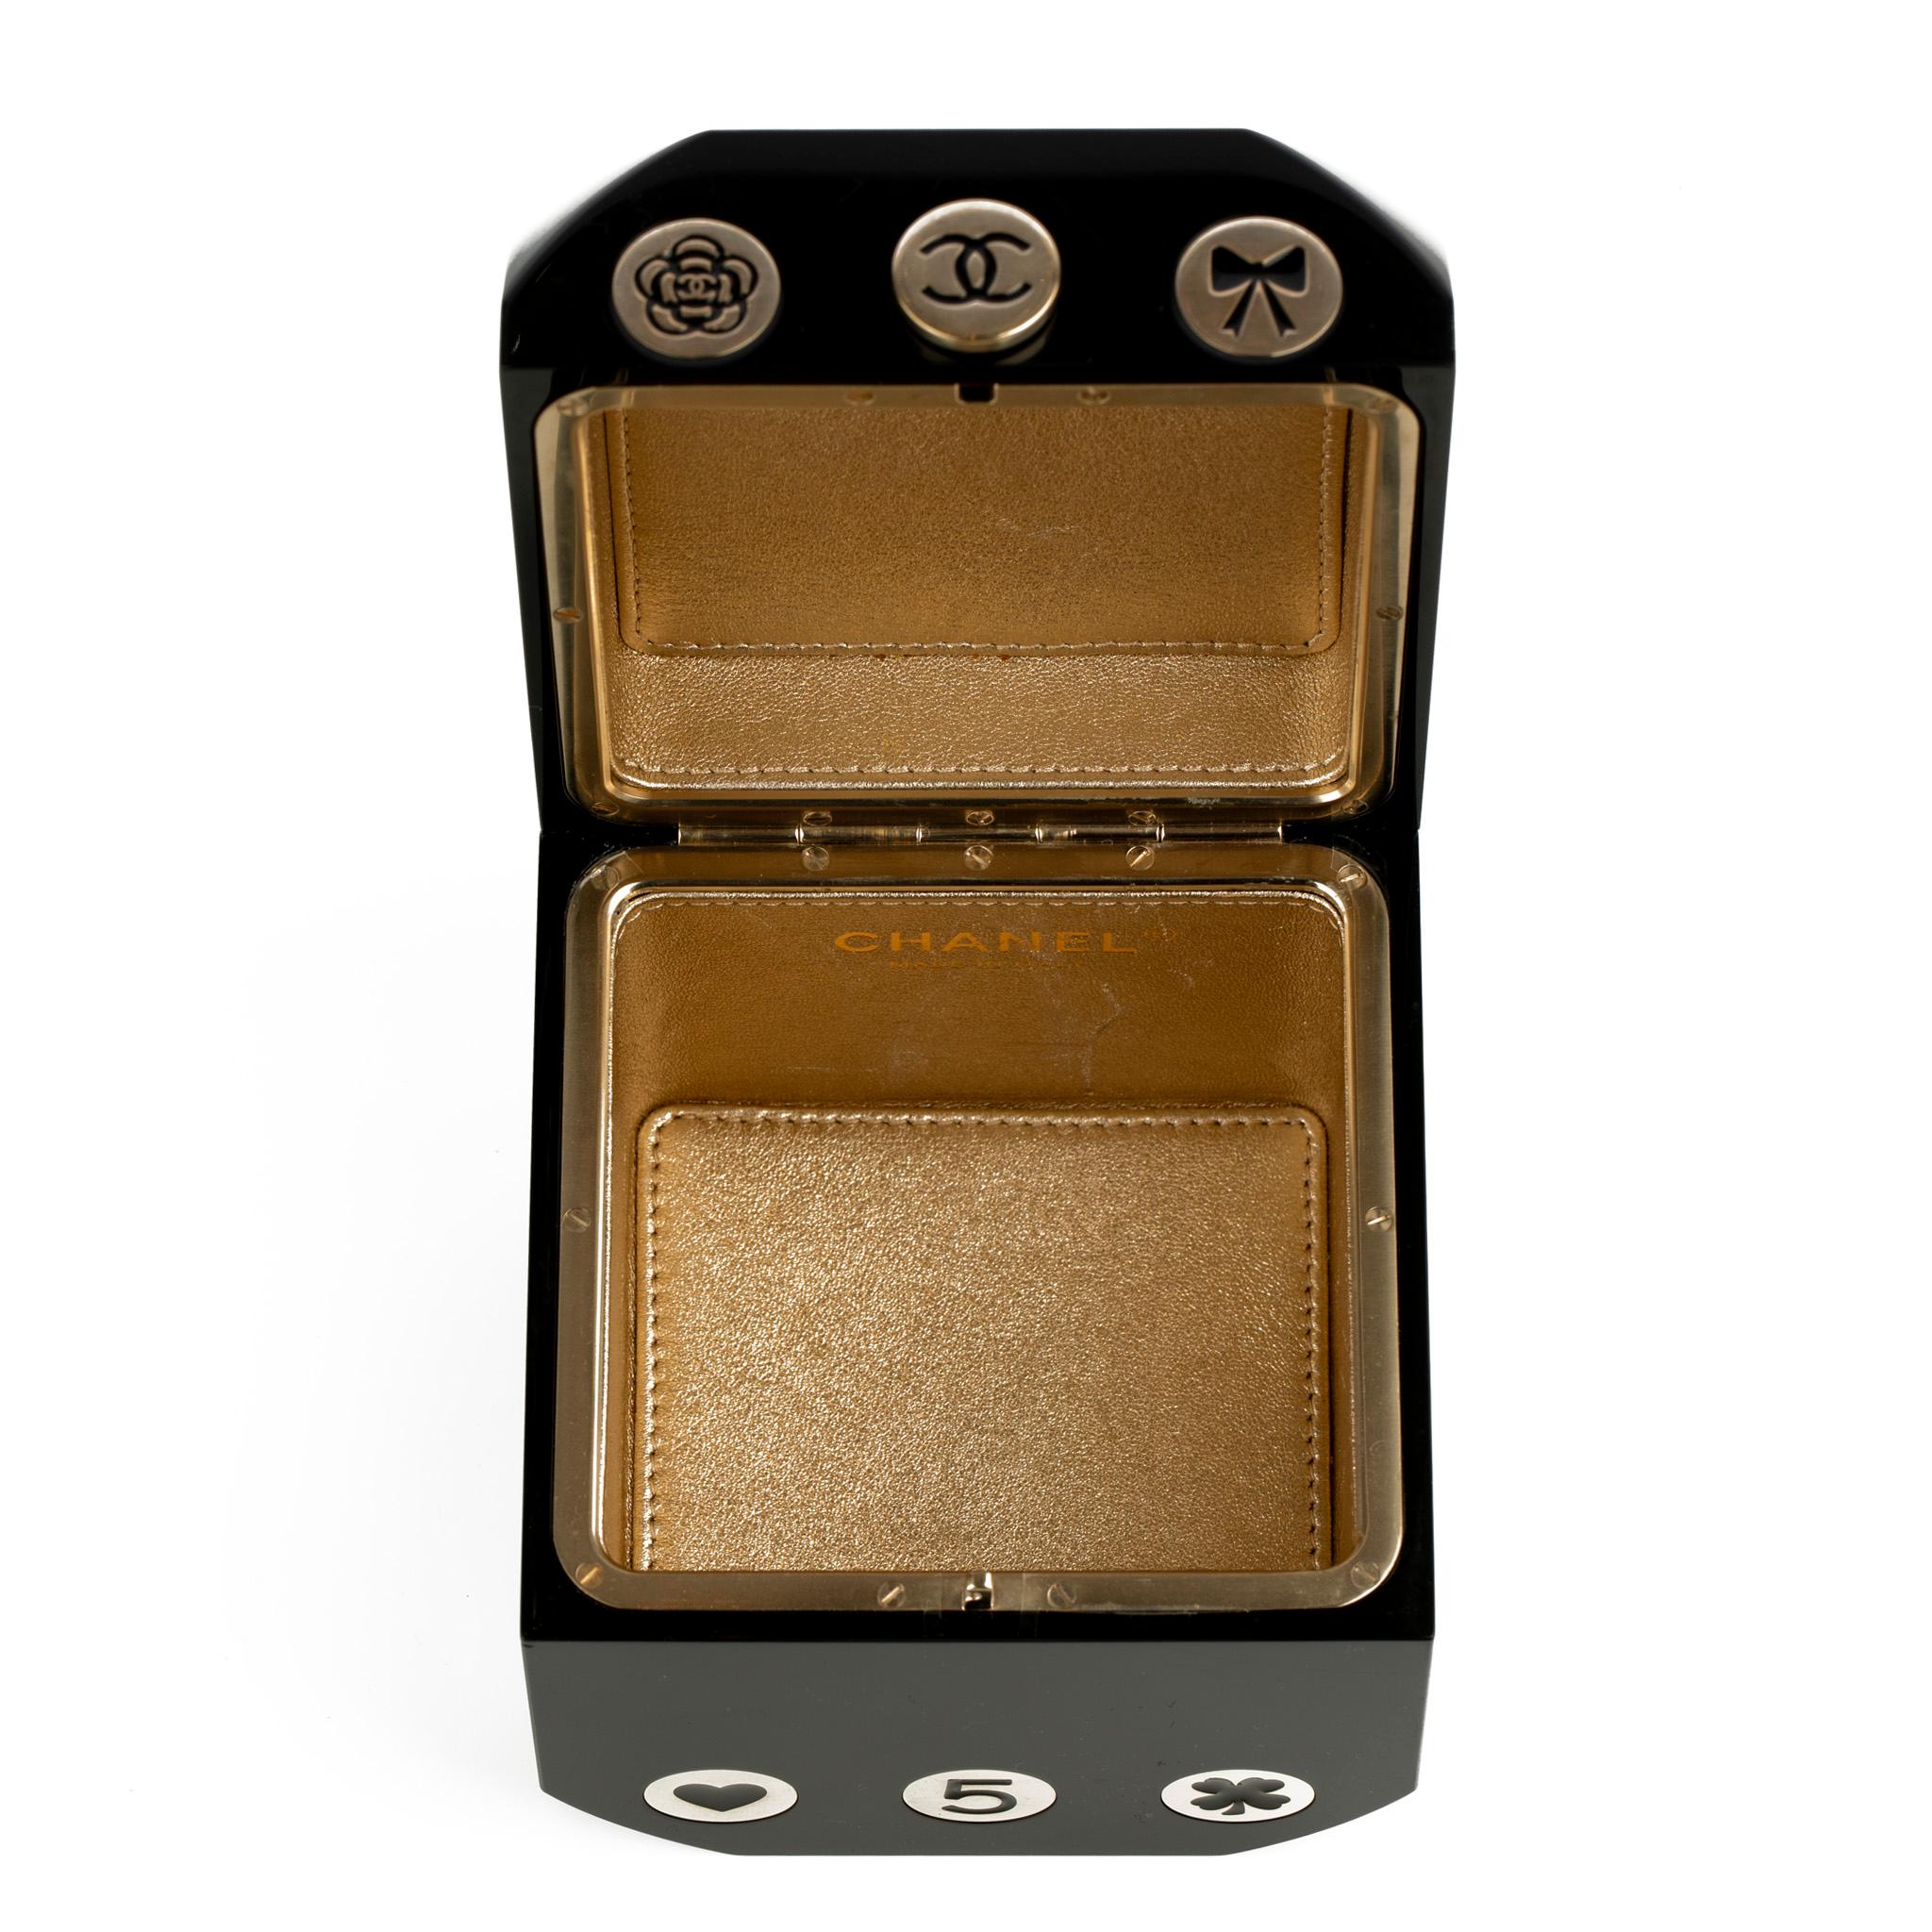 Chanel Minaudière Limited Edition Casino Dice Black Gold-Tone Hardware For Sale 10